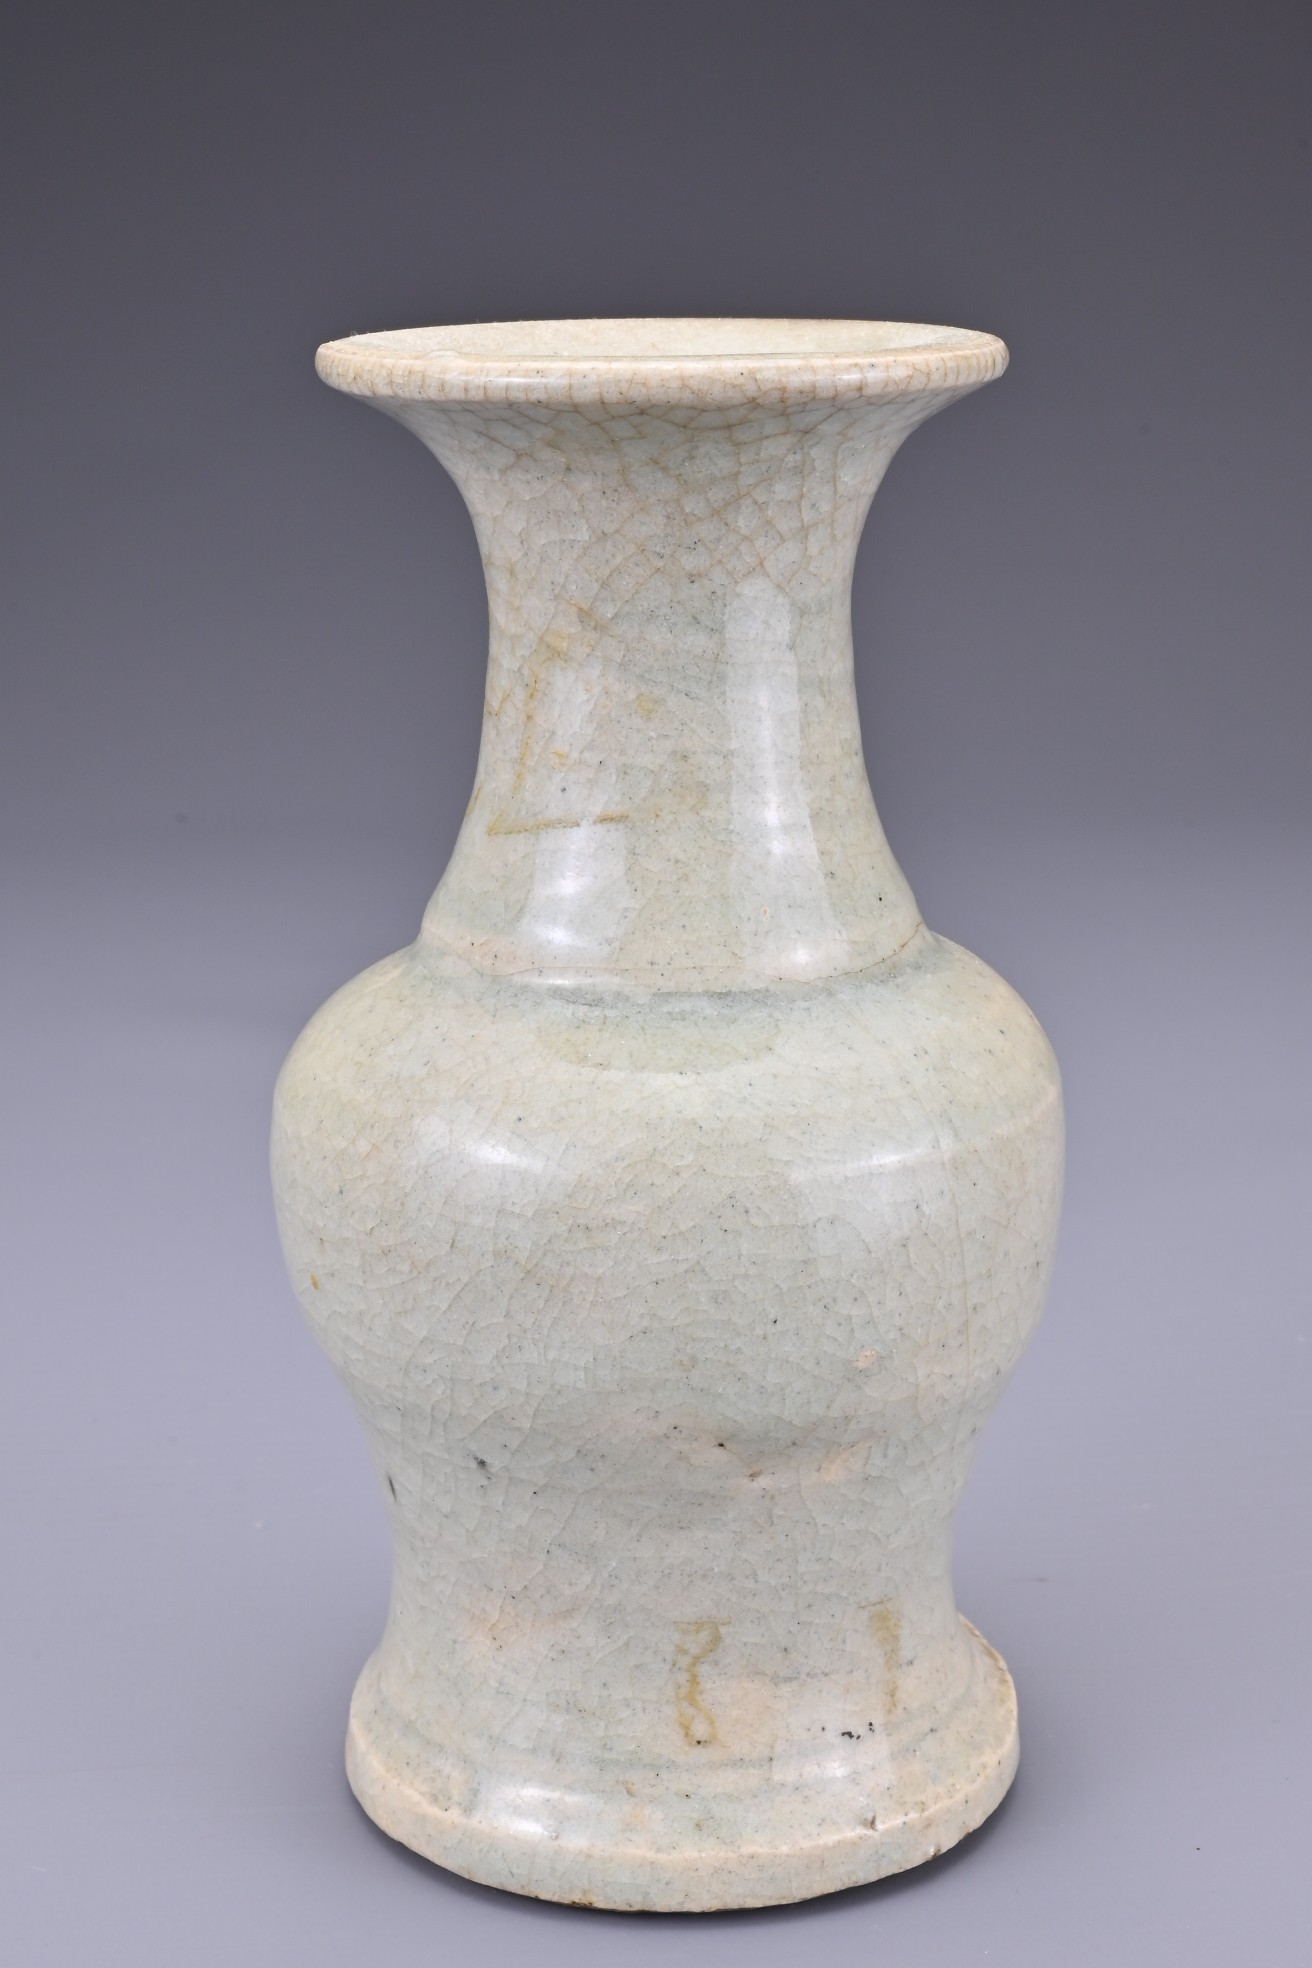 A CHINESE PALE CELADON VASE, LATE MING DYNASTY. Heavily potted with visible crackle throughout. 14. - Image 5 of 7